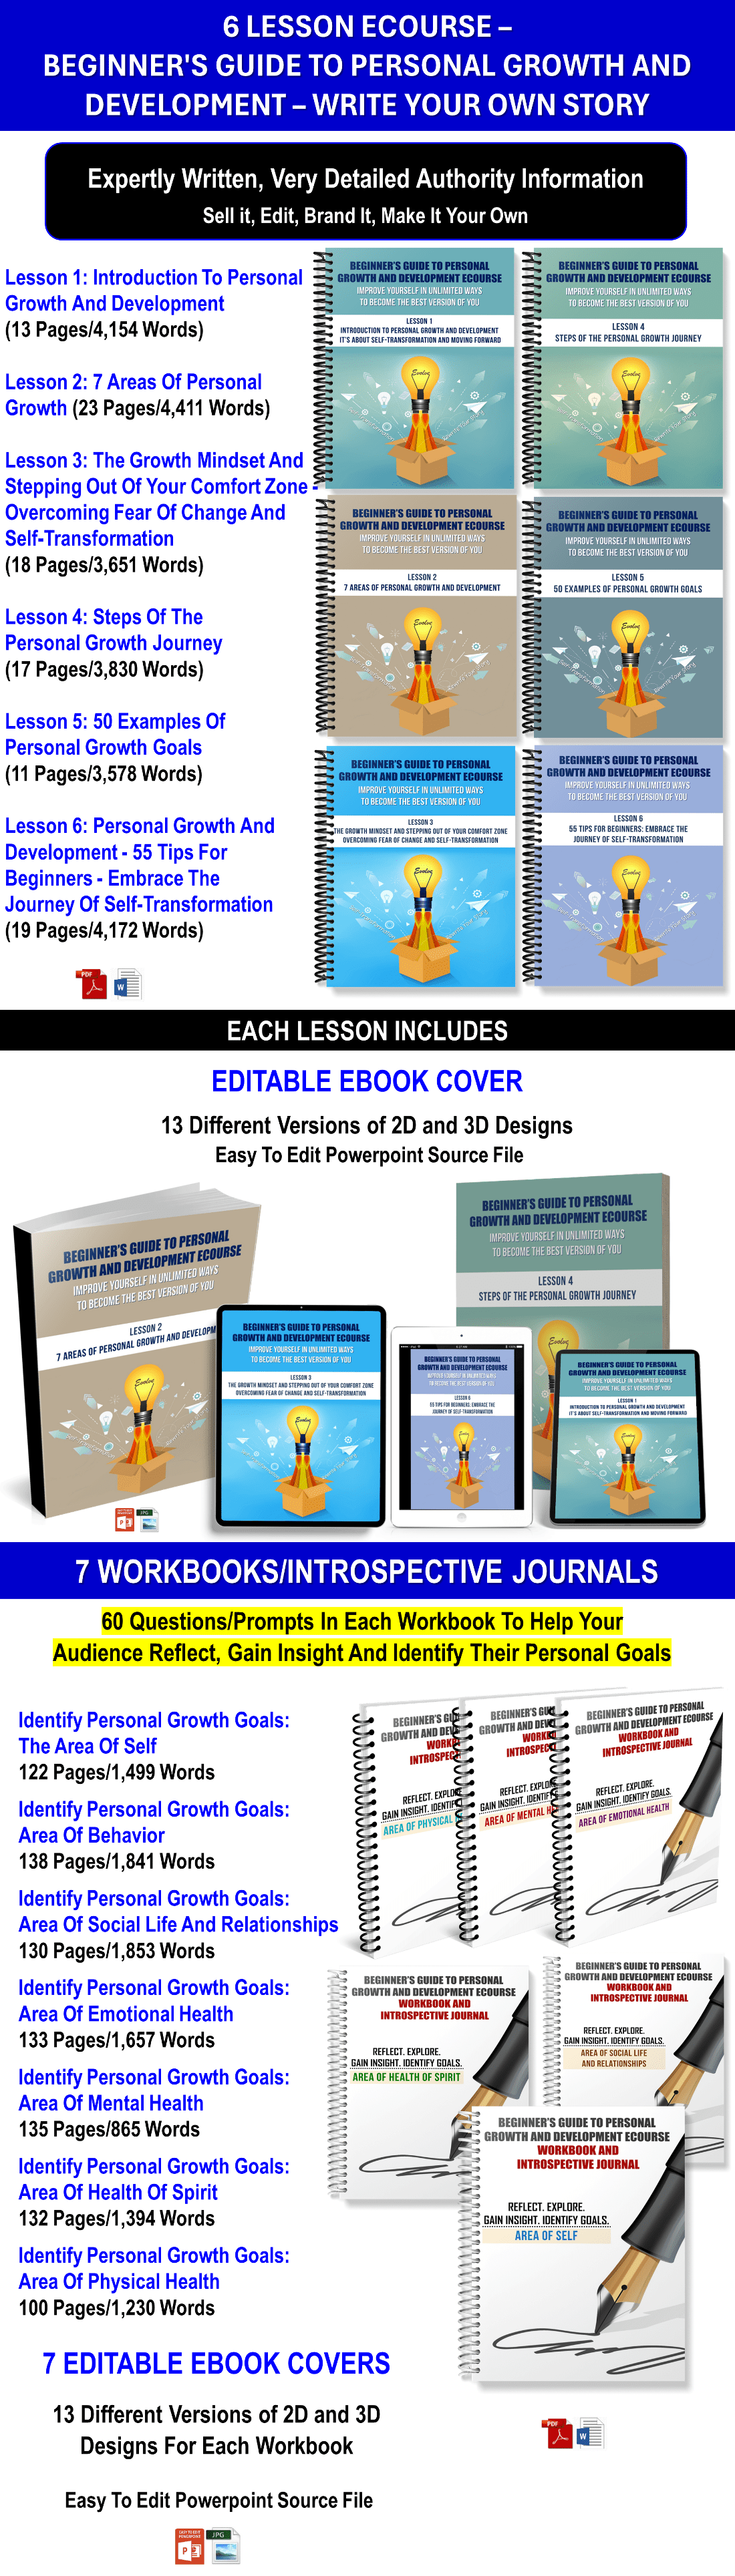 6 Lesson eCourse - Beginner's Guide To Personal Growth And Development Giant Content Pack with PLR Rights